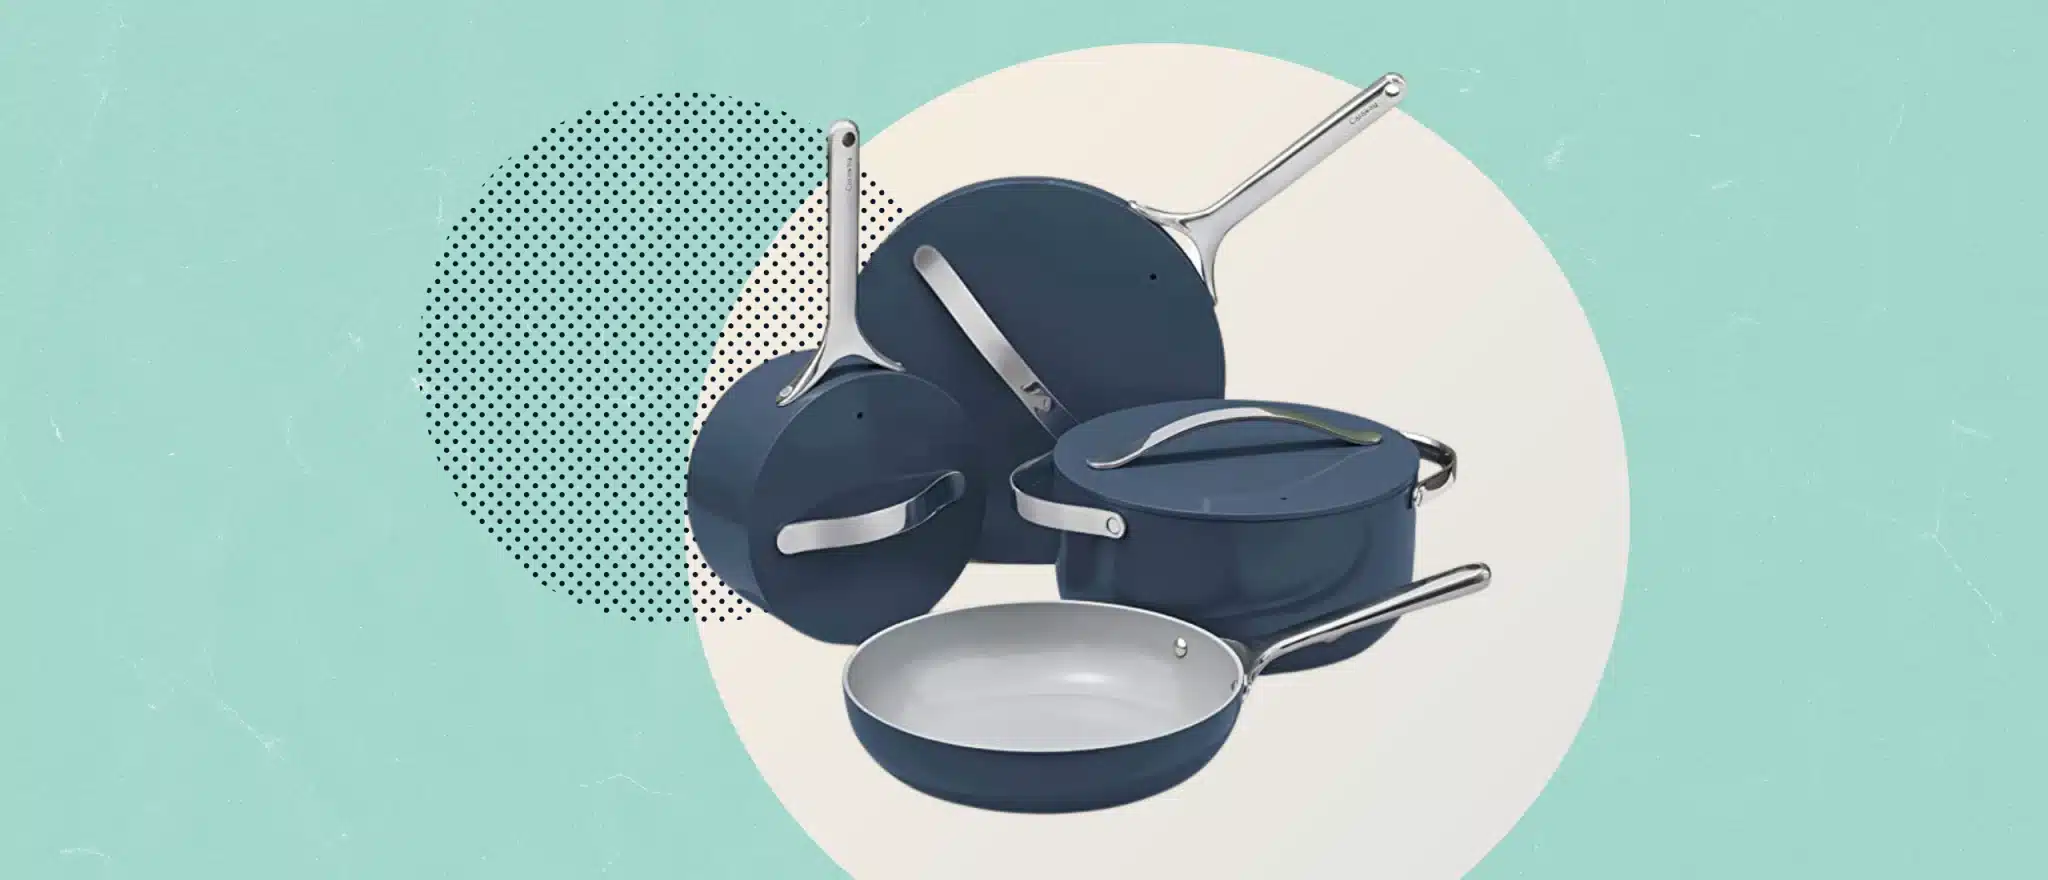 I Swapped My Non-Stick Pans for Toxin-Free Caraway Cookware and I’m Never Going Back